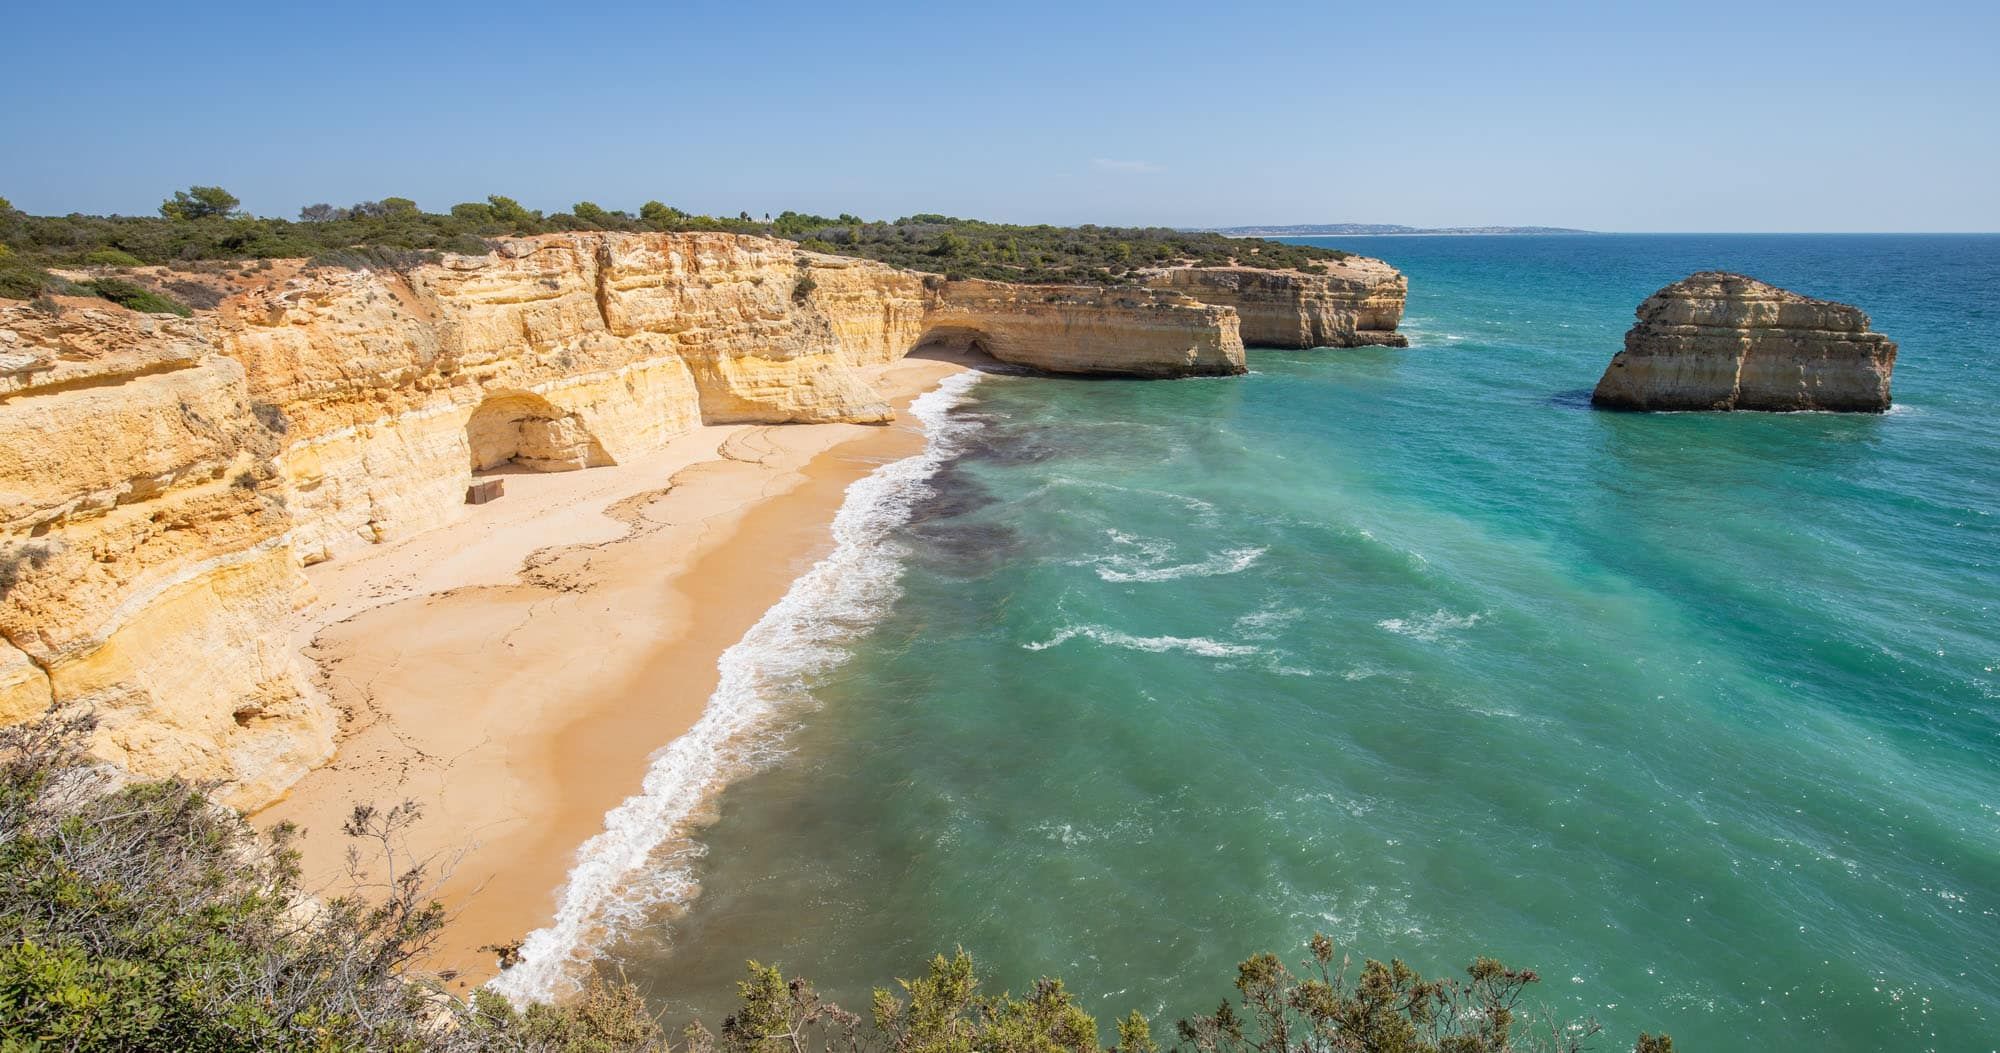 Featured image for “Algarve Bucket List: 20 Epic Things to Do in Algarve, Portugal”